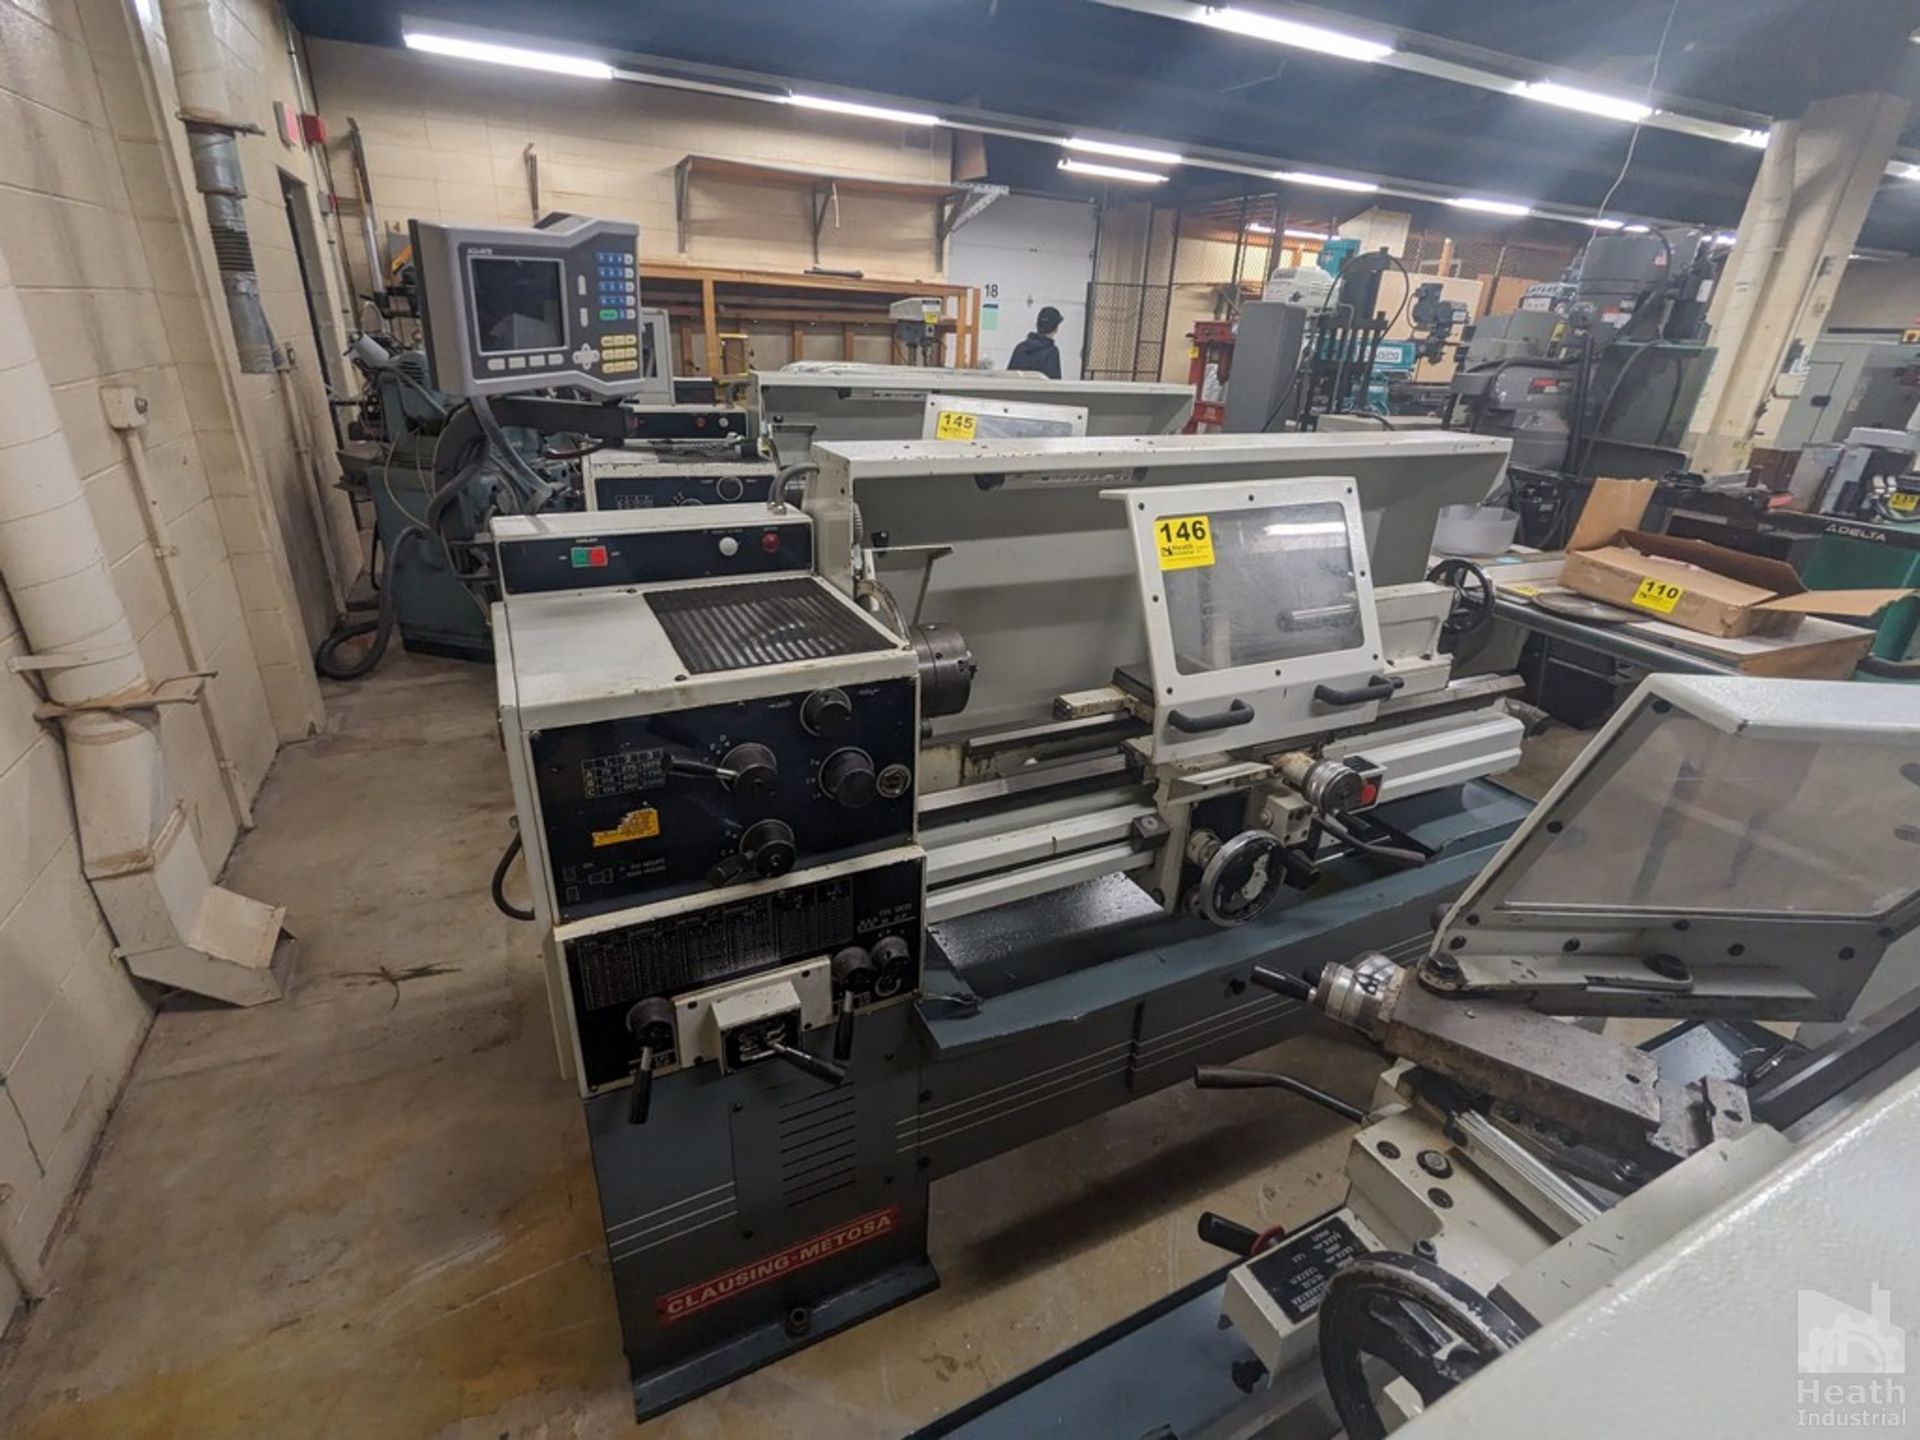 CLAUSING-METOSA 13"X40" MODEL 1340S TOOLROOM LATHE, S/N 49908. 2500 SPINDLE RPM, WITH 6" 3-JAW